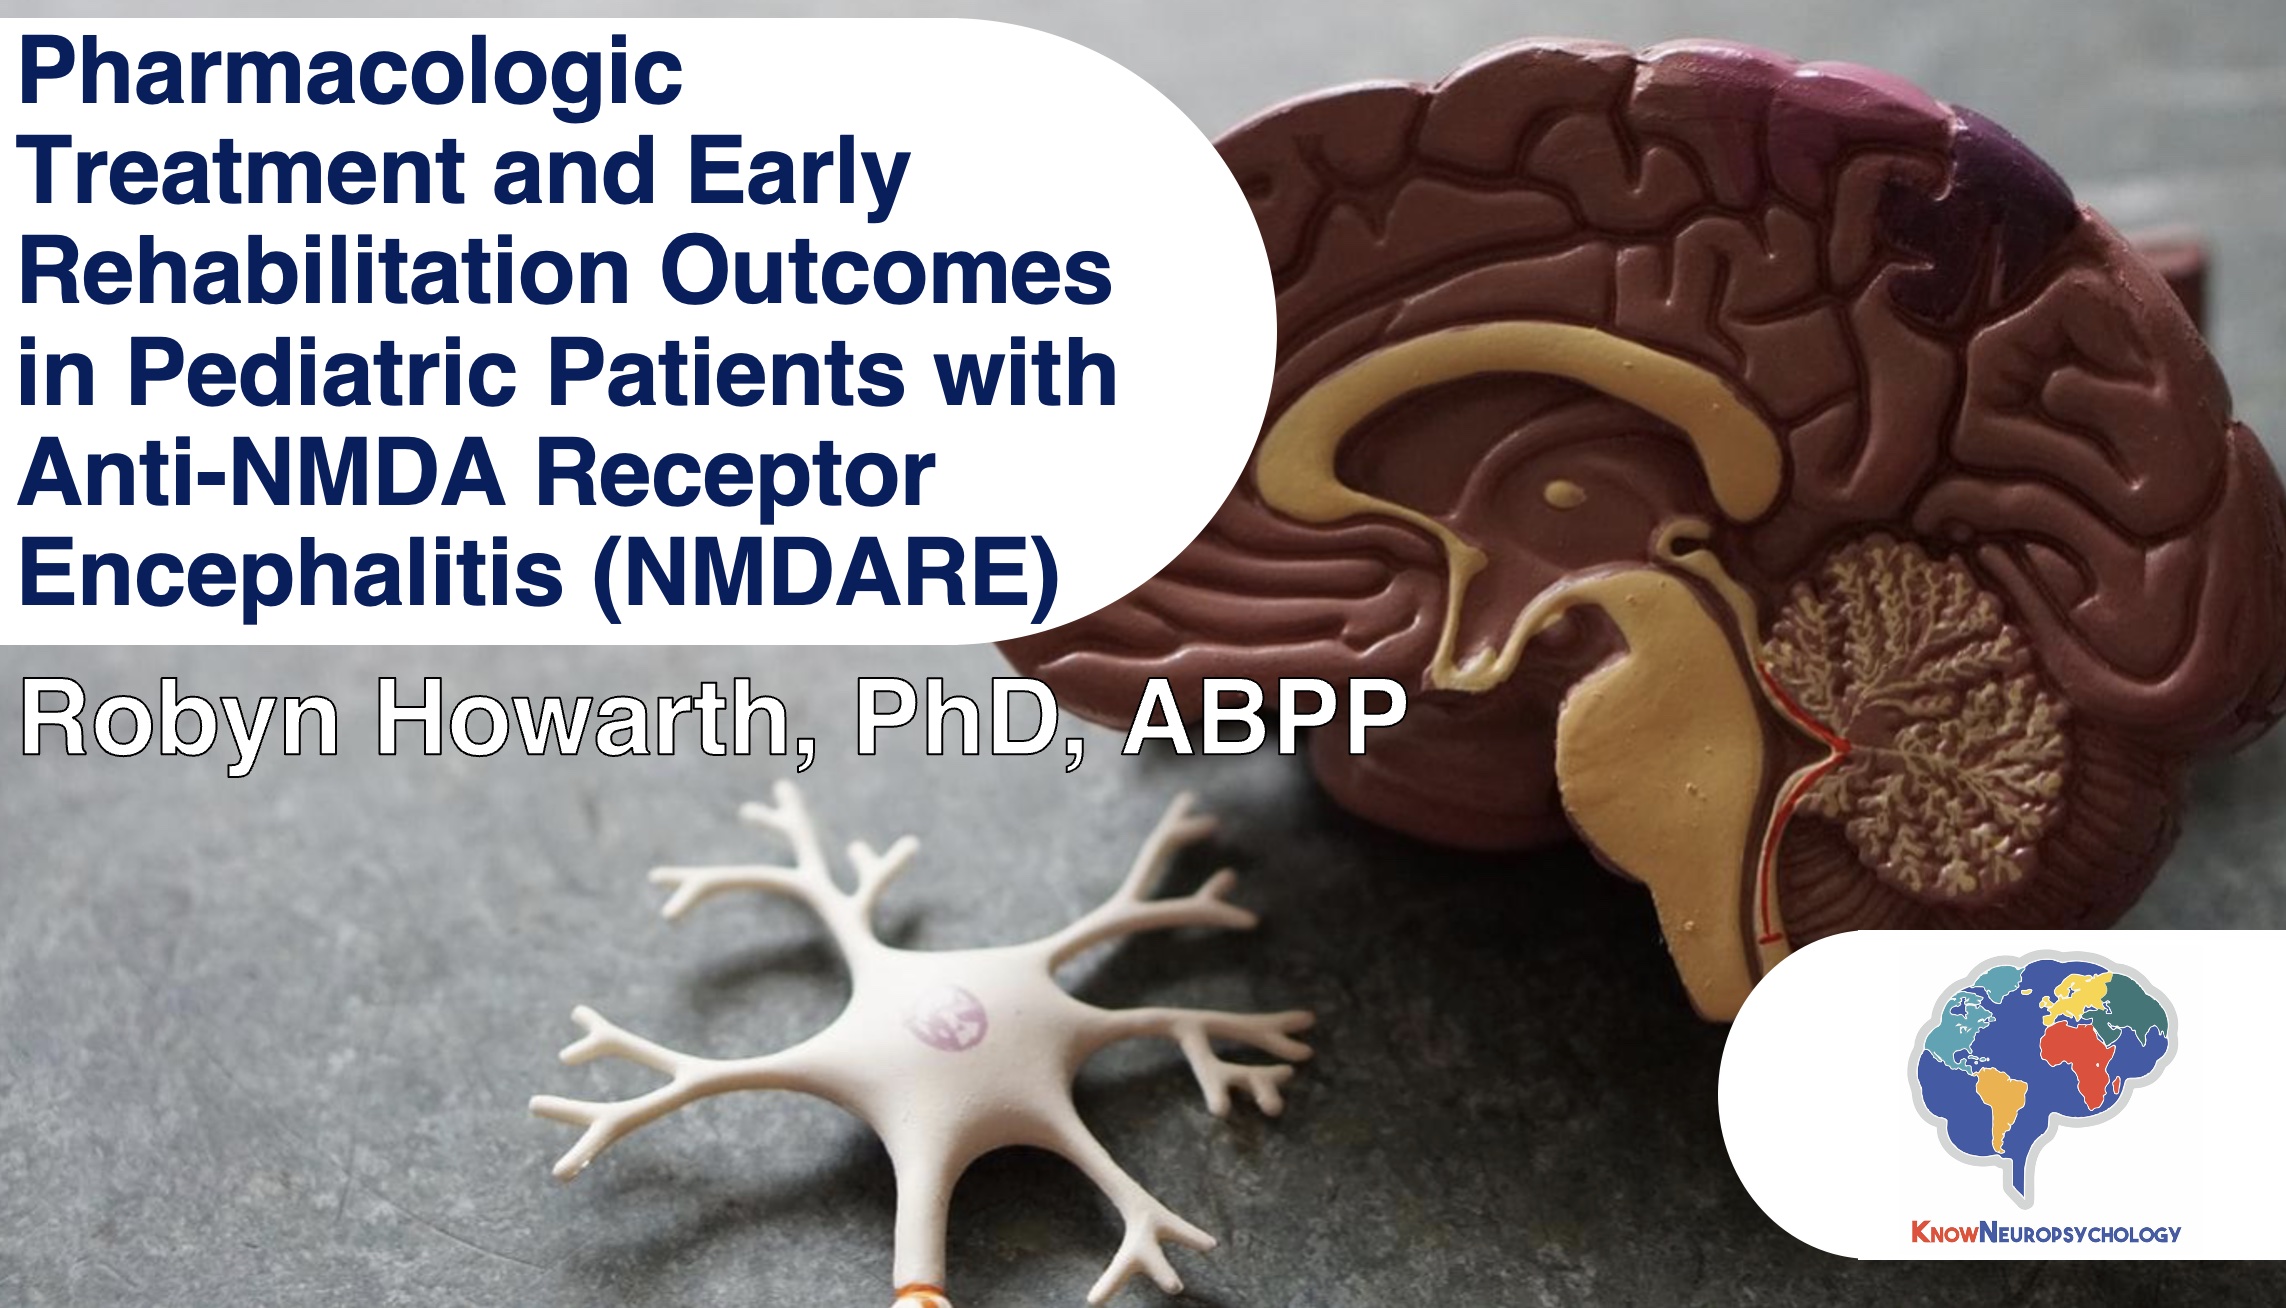 Pharmacologic Treatment and Early Rehabilitation Outcomes in Pediatric Patients with Anti-NMDA Receptor Encephalitis